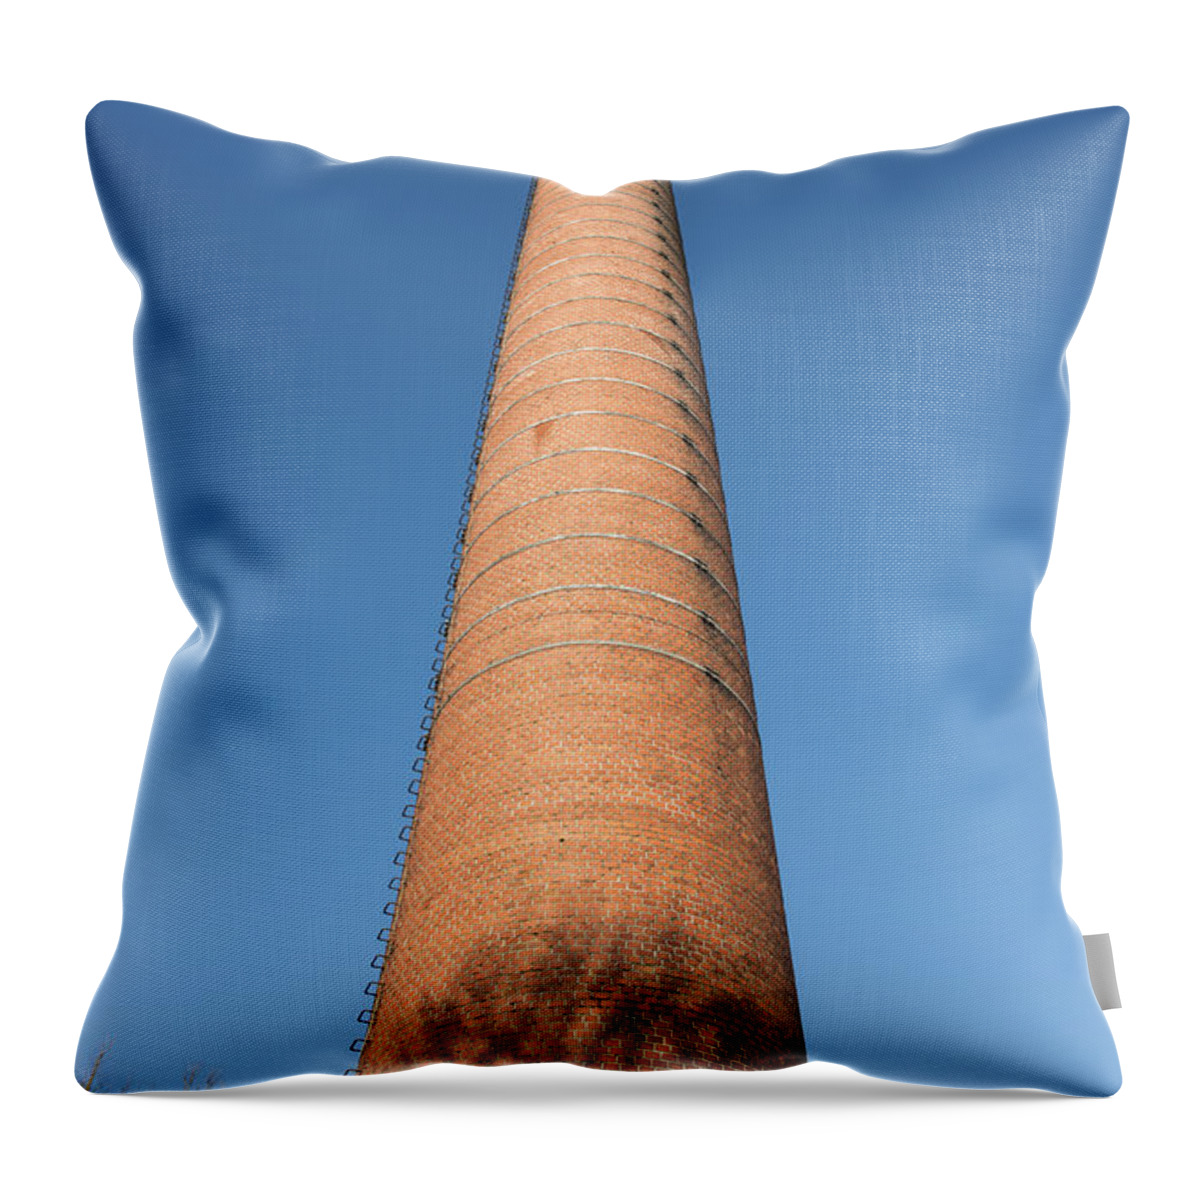 Chimney Throw Pillow featuring the photograph High Chimney At Blue Sky by Compuinfoto 